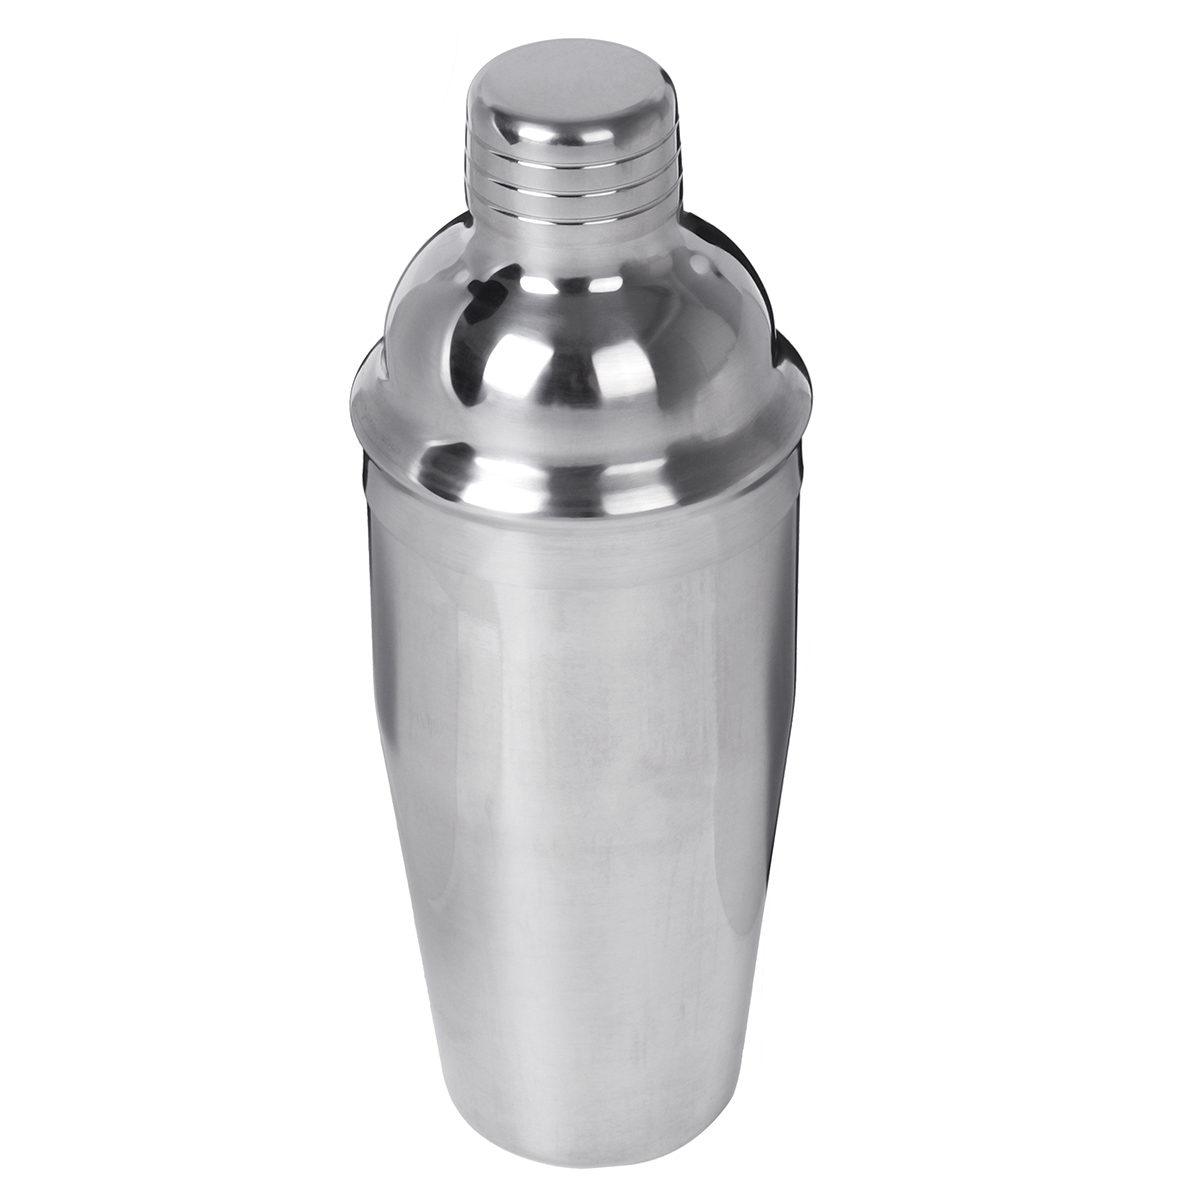 20PCS-750ml-Stainless-Steel-Cocktail-Shaker-Mixer-Drink-Set-Bartender-Bar-Party-1719706